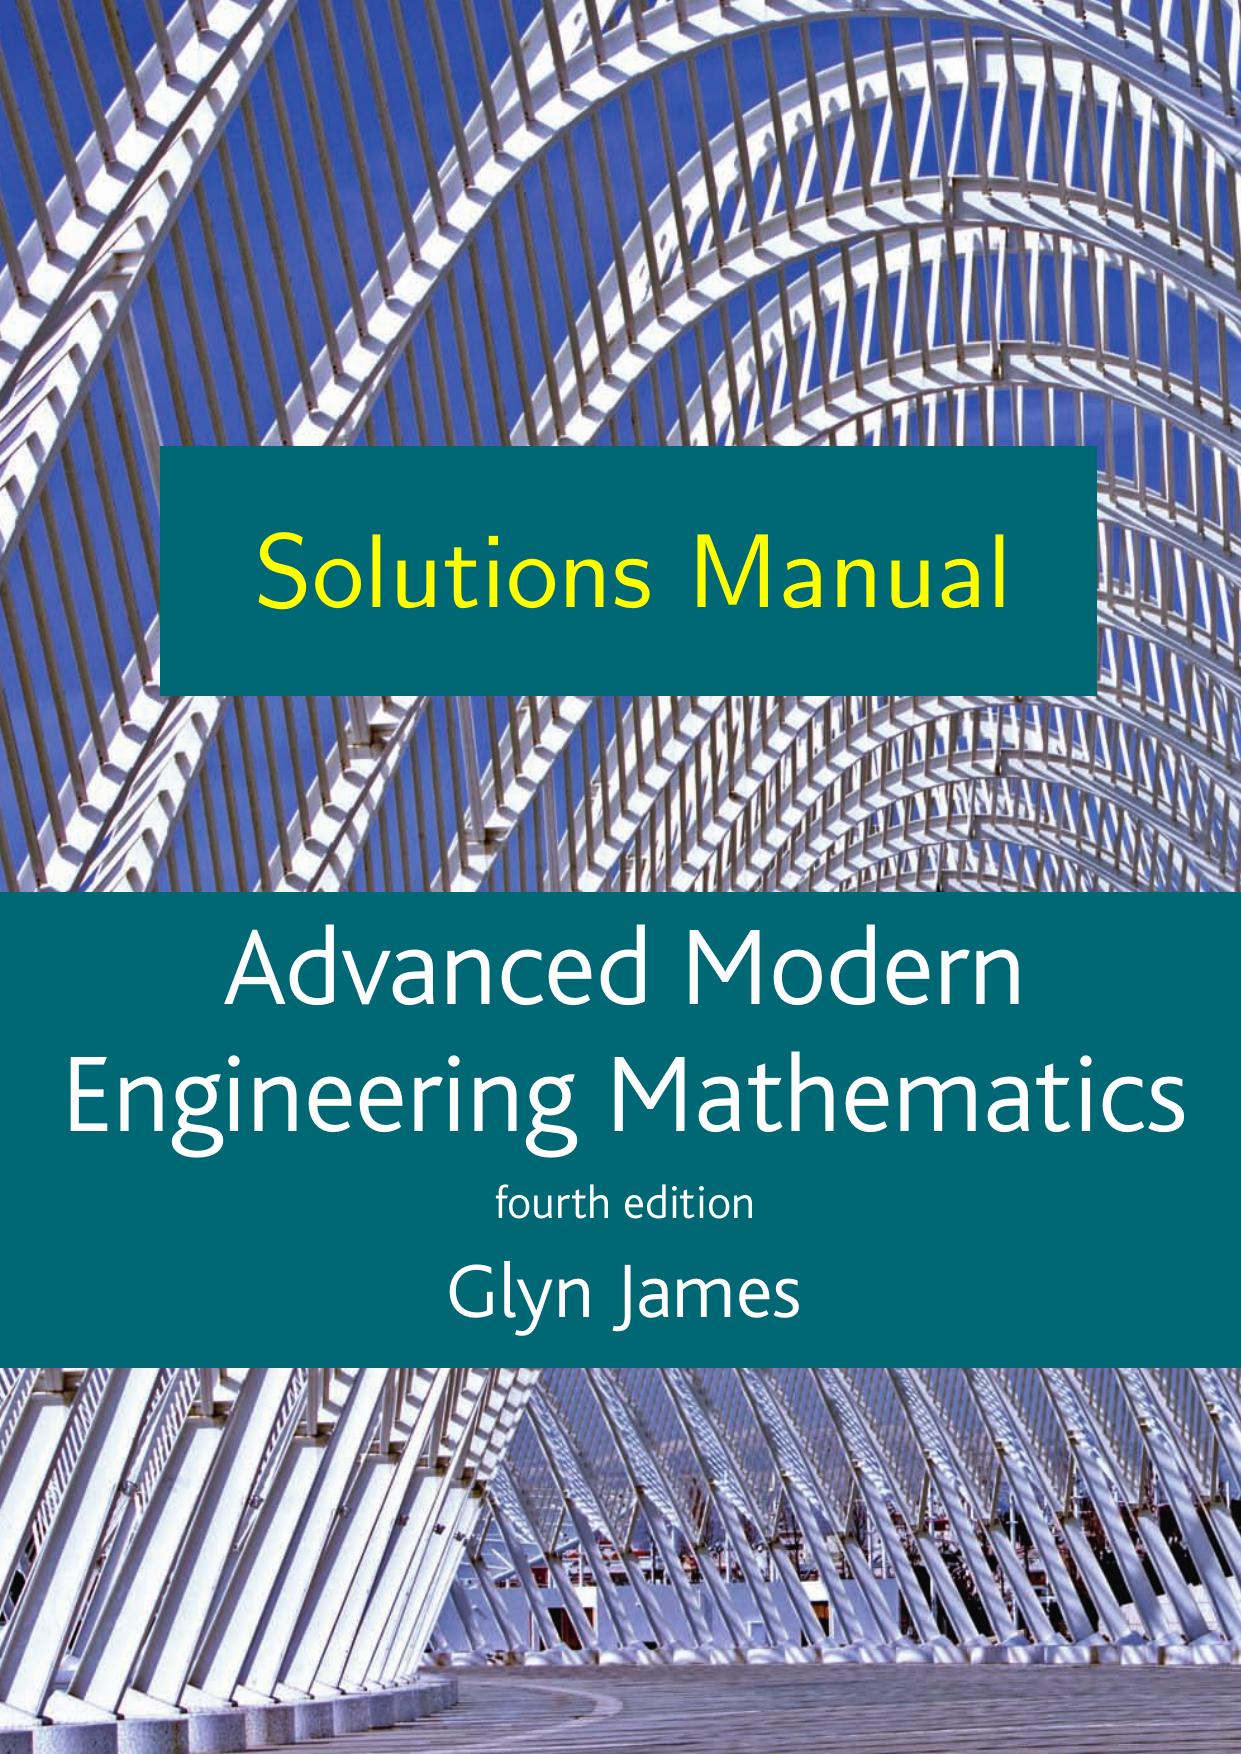 Solutions Manual to Advanced Modern Engineering Mathematics, 4th Edition